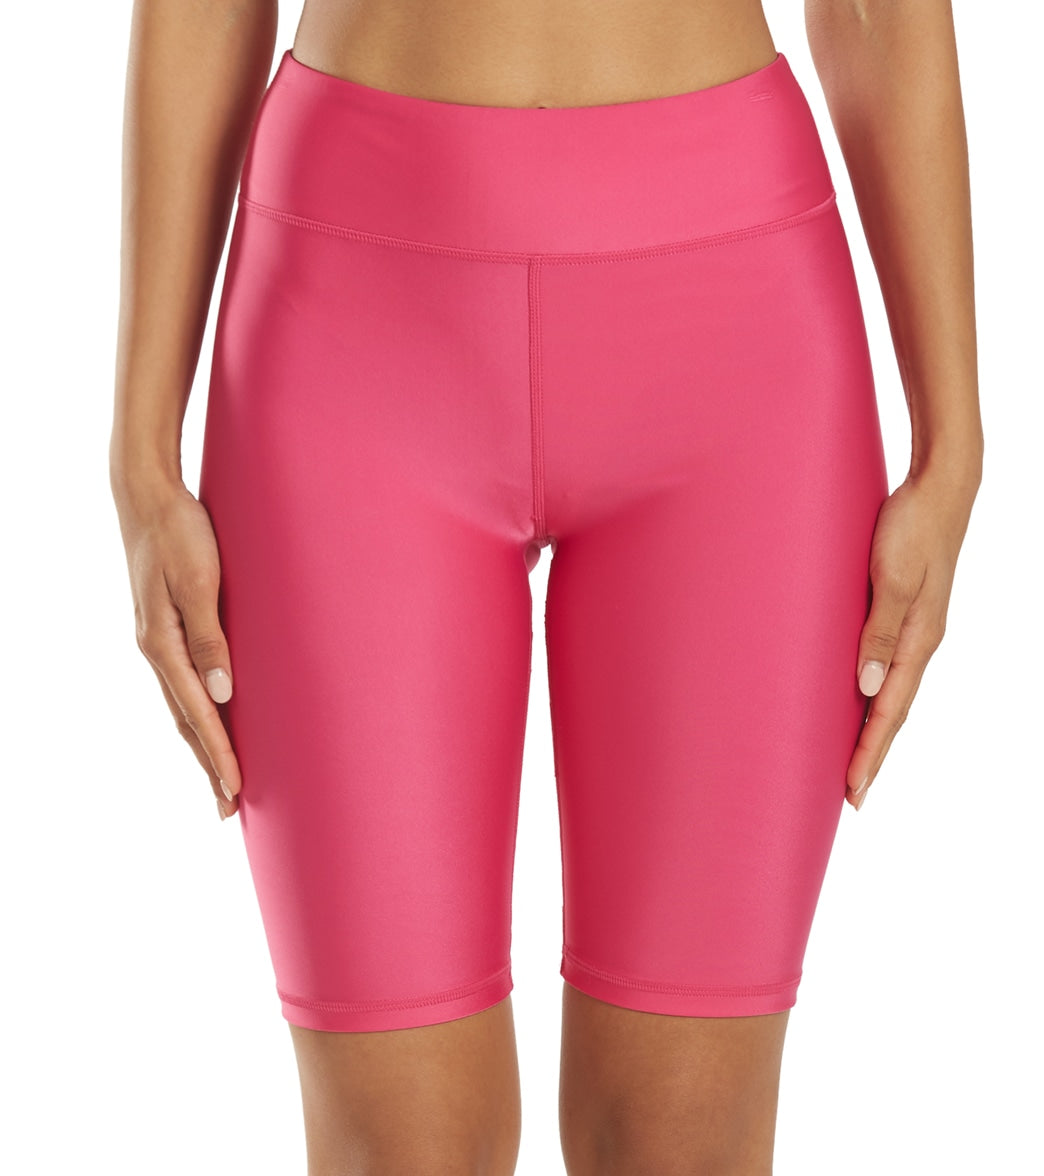 Electric Yoga Women's Clothing & Accessories